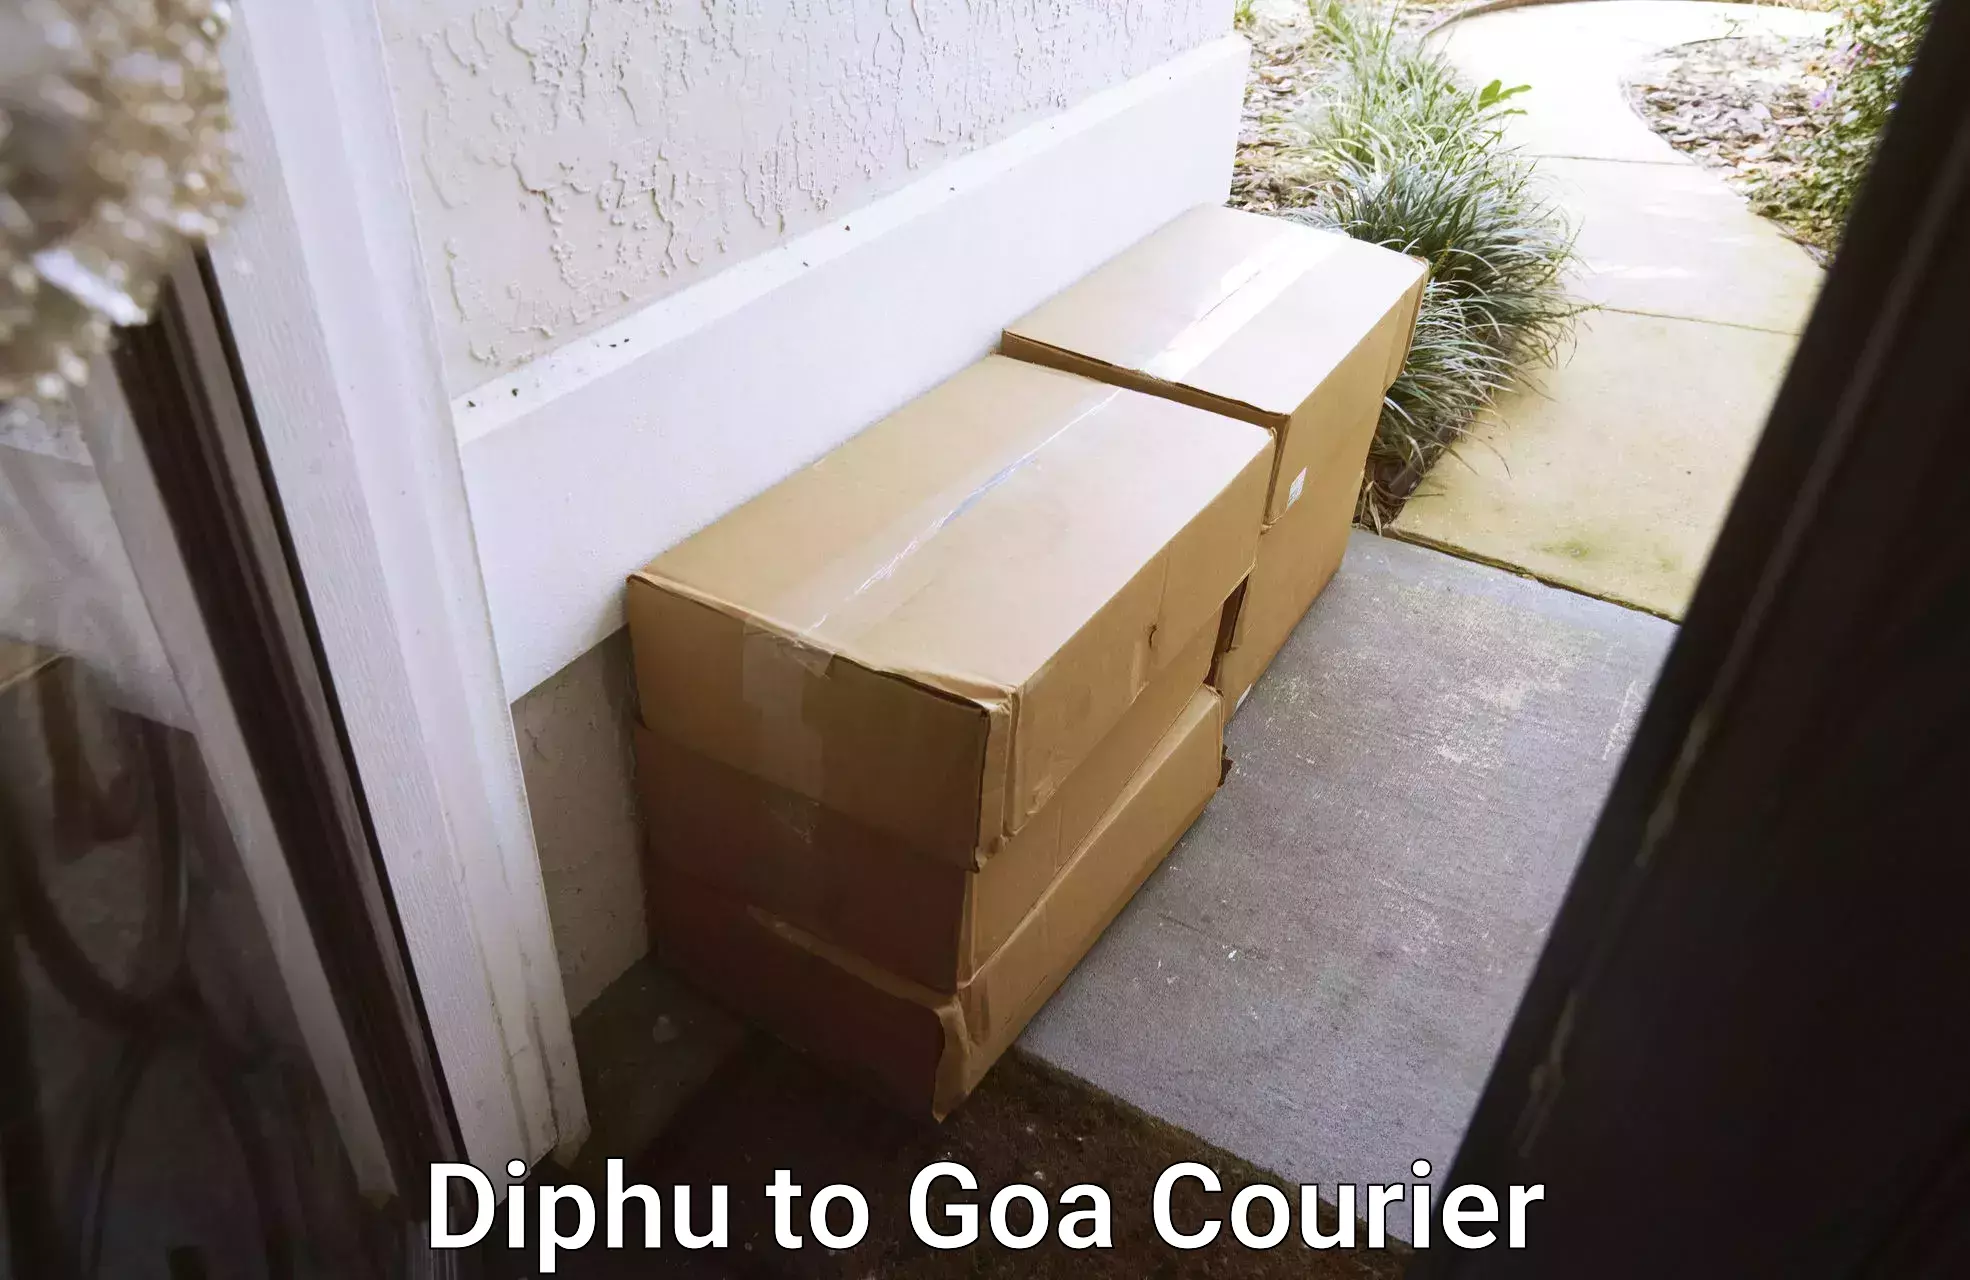 Express delivery network Diphu to Goa